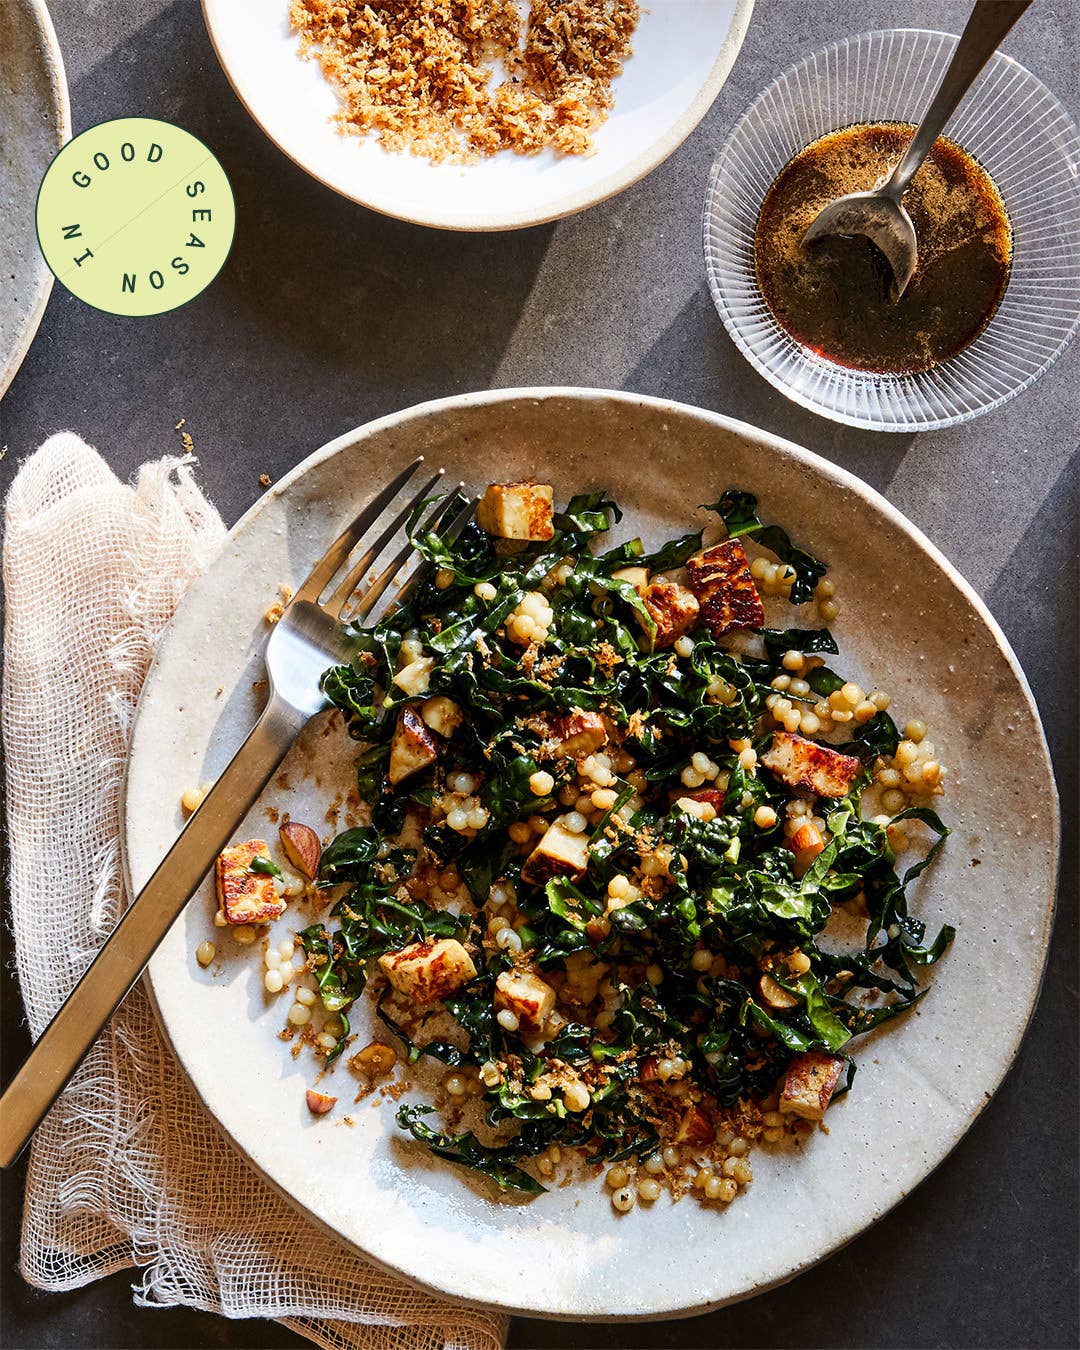 Pearled Couscous Salad with Kale, Halloumi, and Za’atar